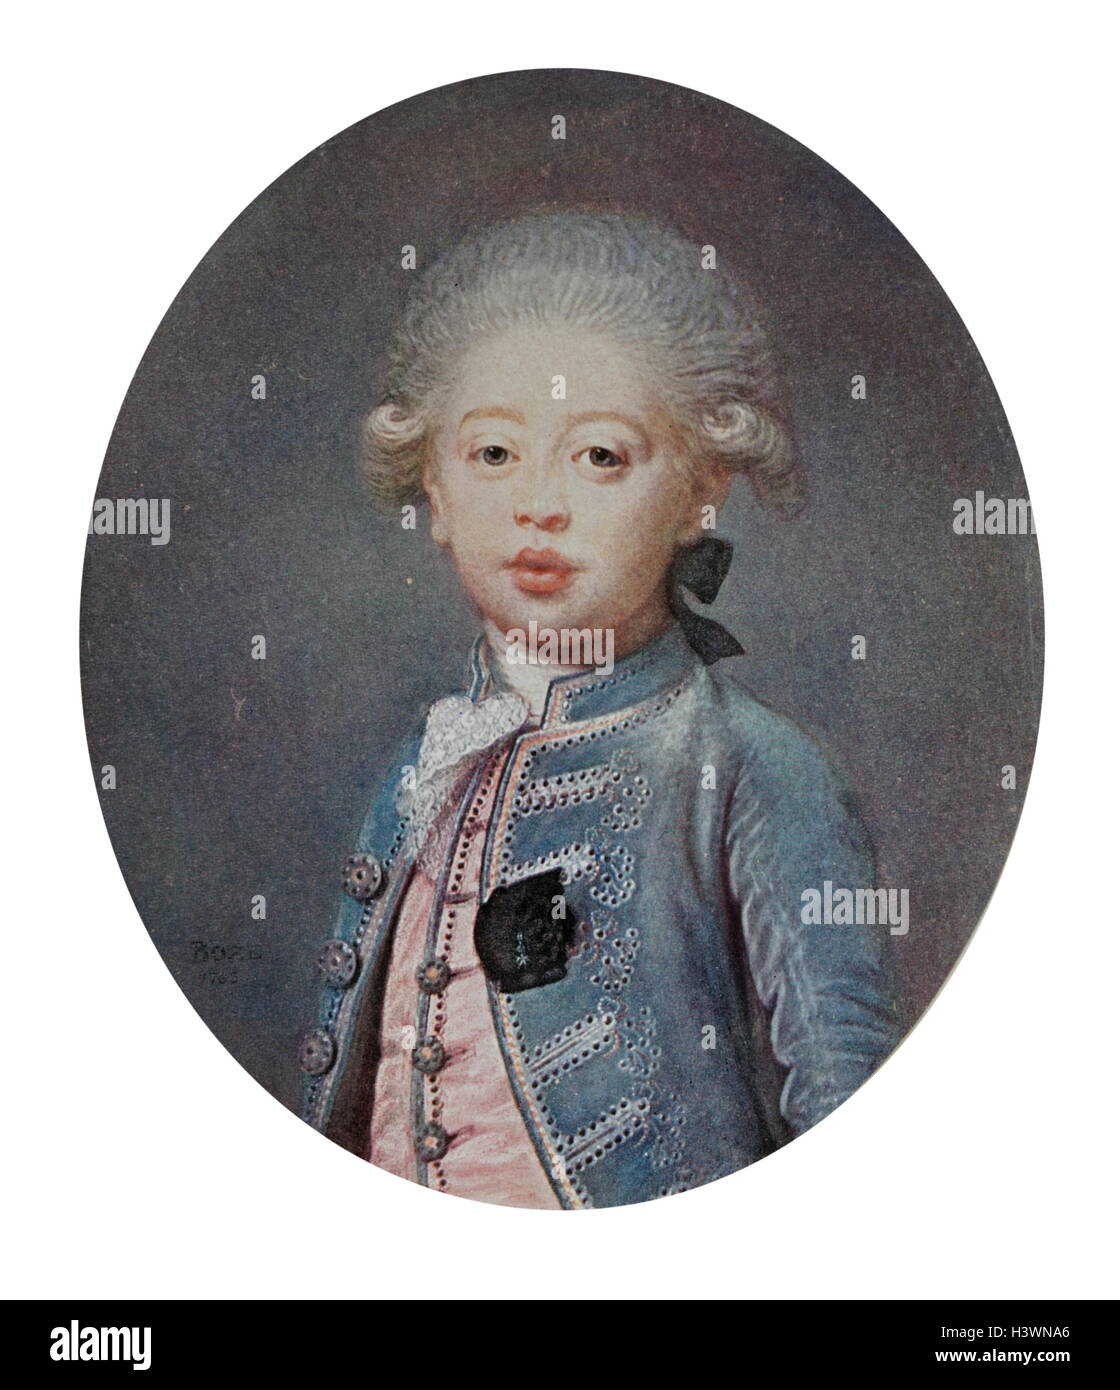 Portrait of a young Louis Antoine, Duke of Angoulême (1775-1844) the last Dauphin of France. Painted by Joseph Boze (1746-1826) a French portrait and miniature painter. Dated 18th Century Stock Photo